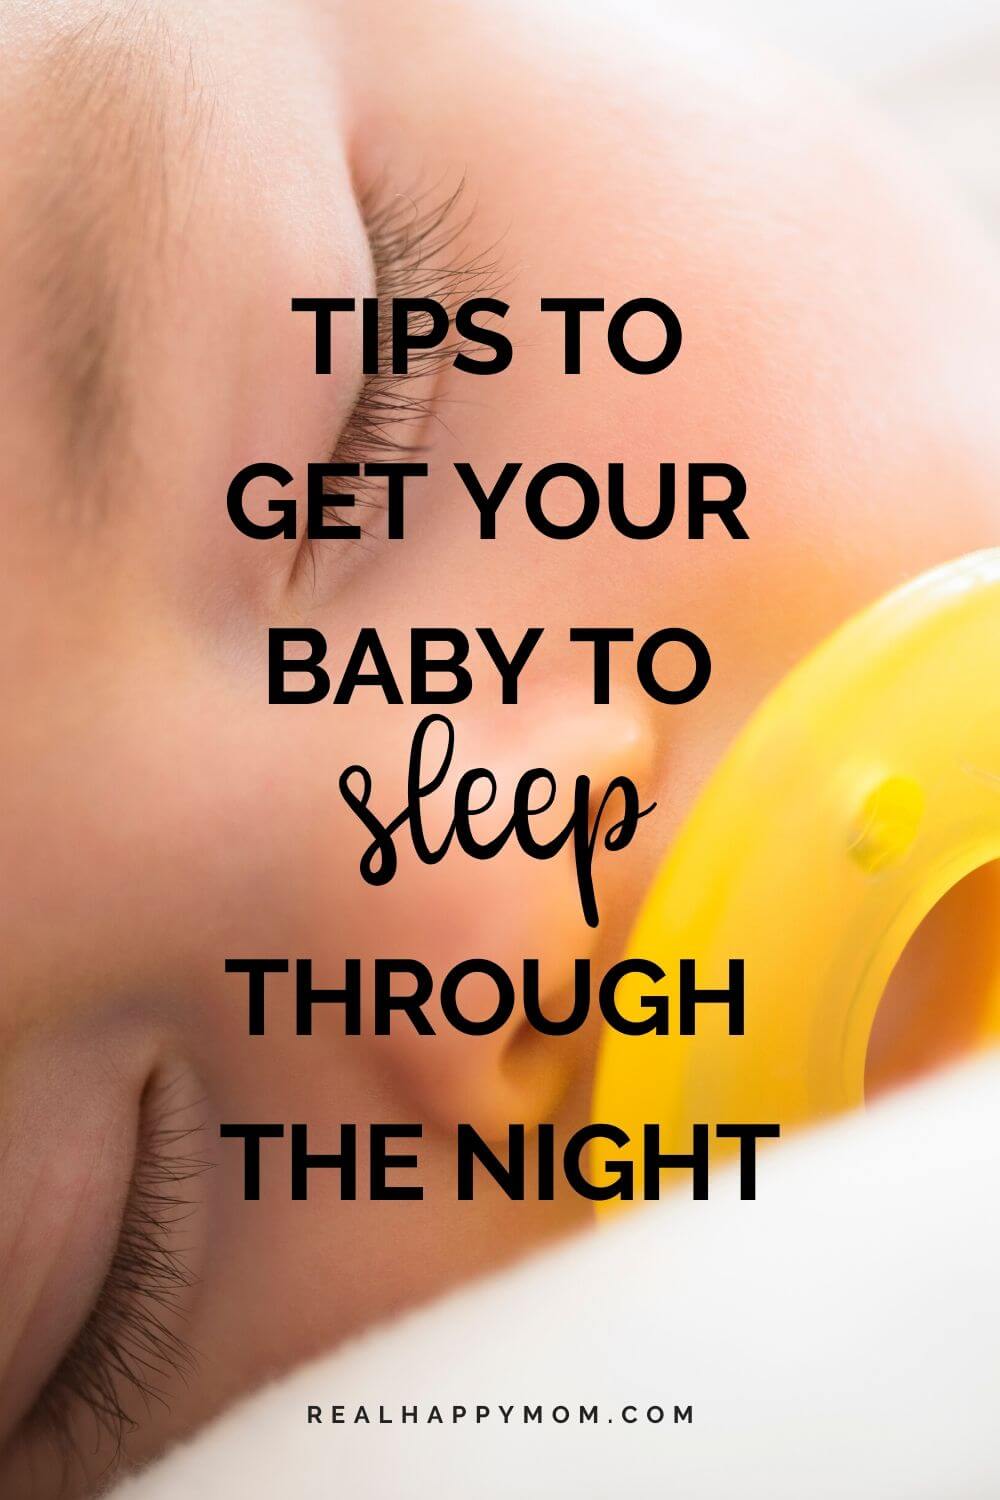 3 Tips to Get Your Baby to Sleep Through the Night